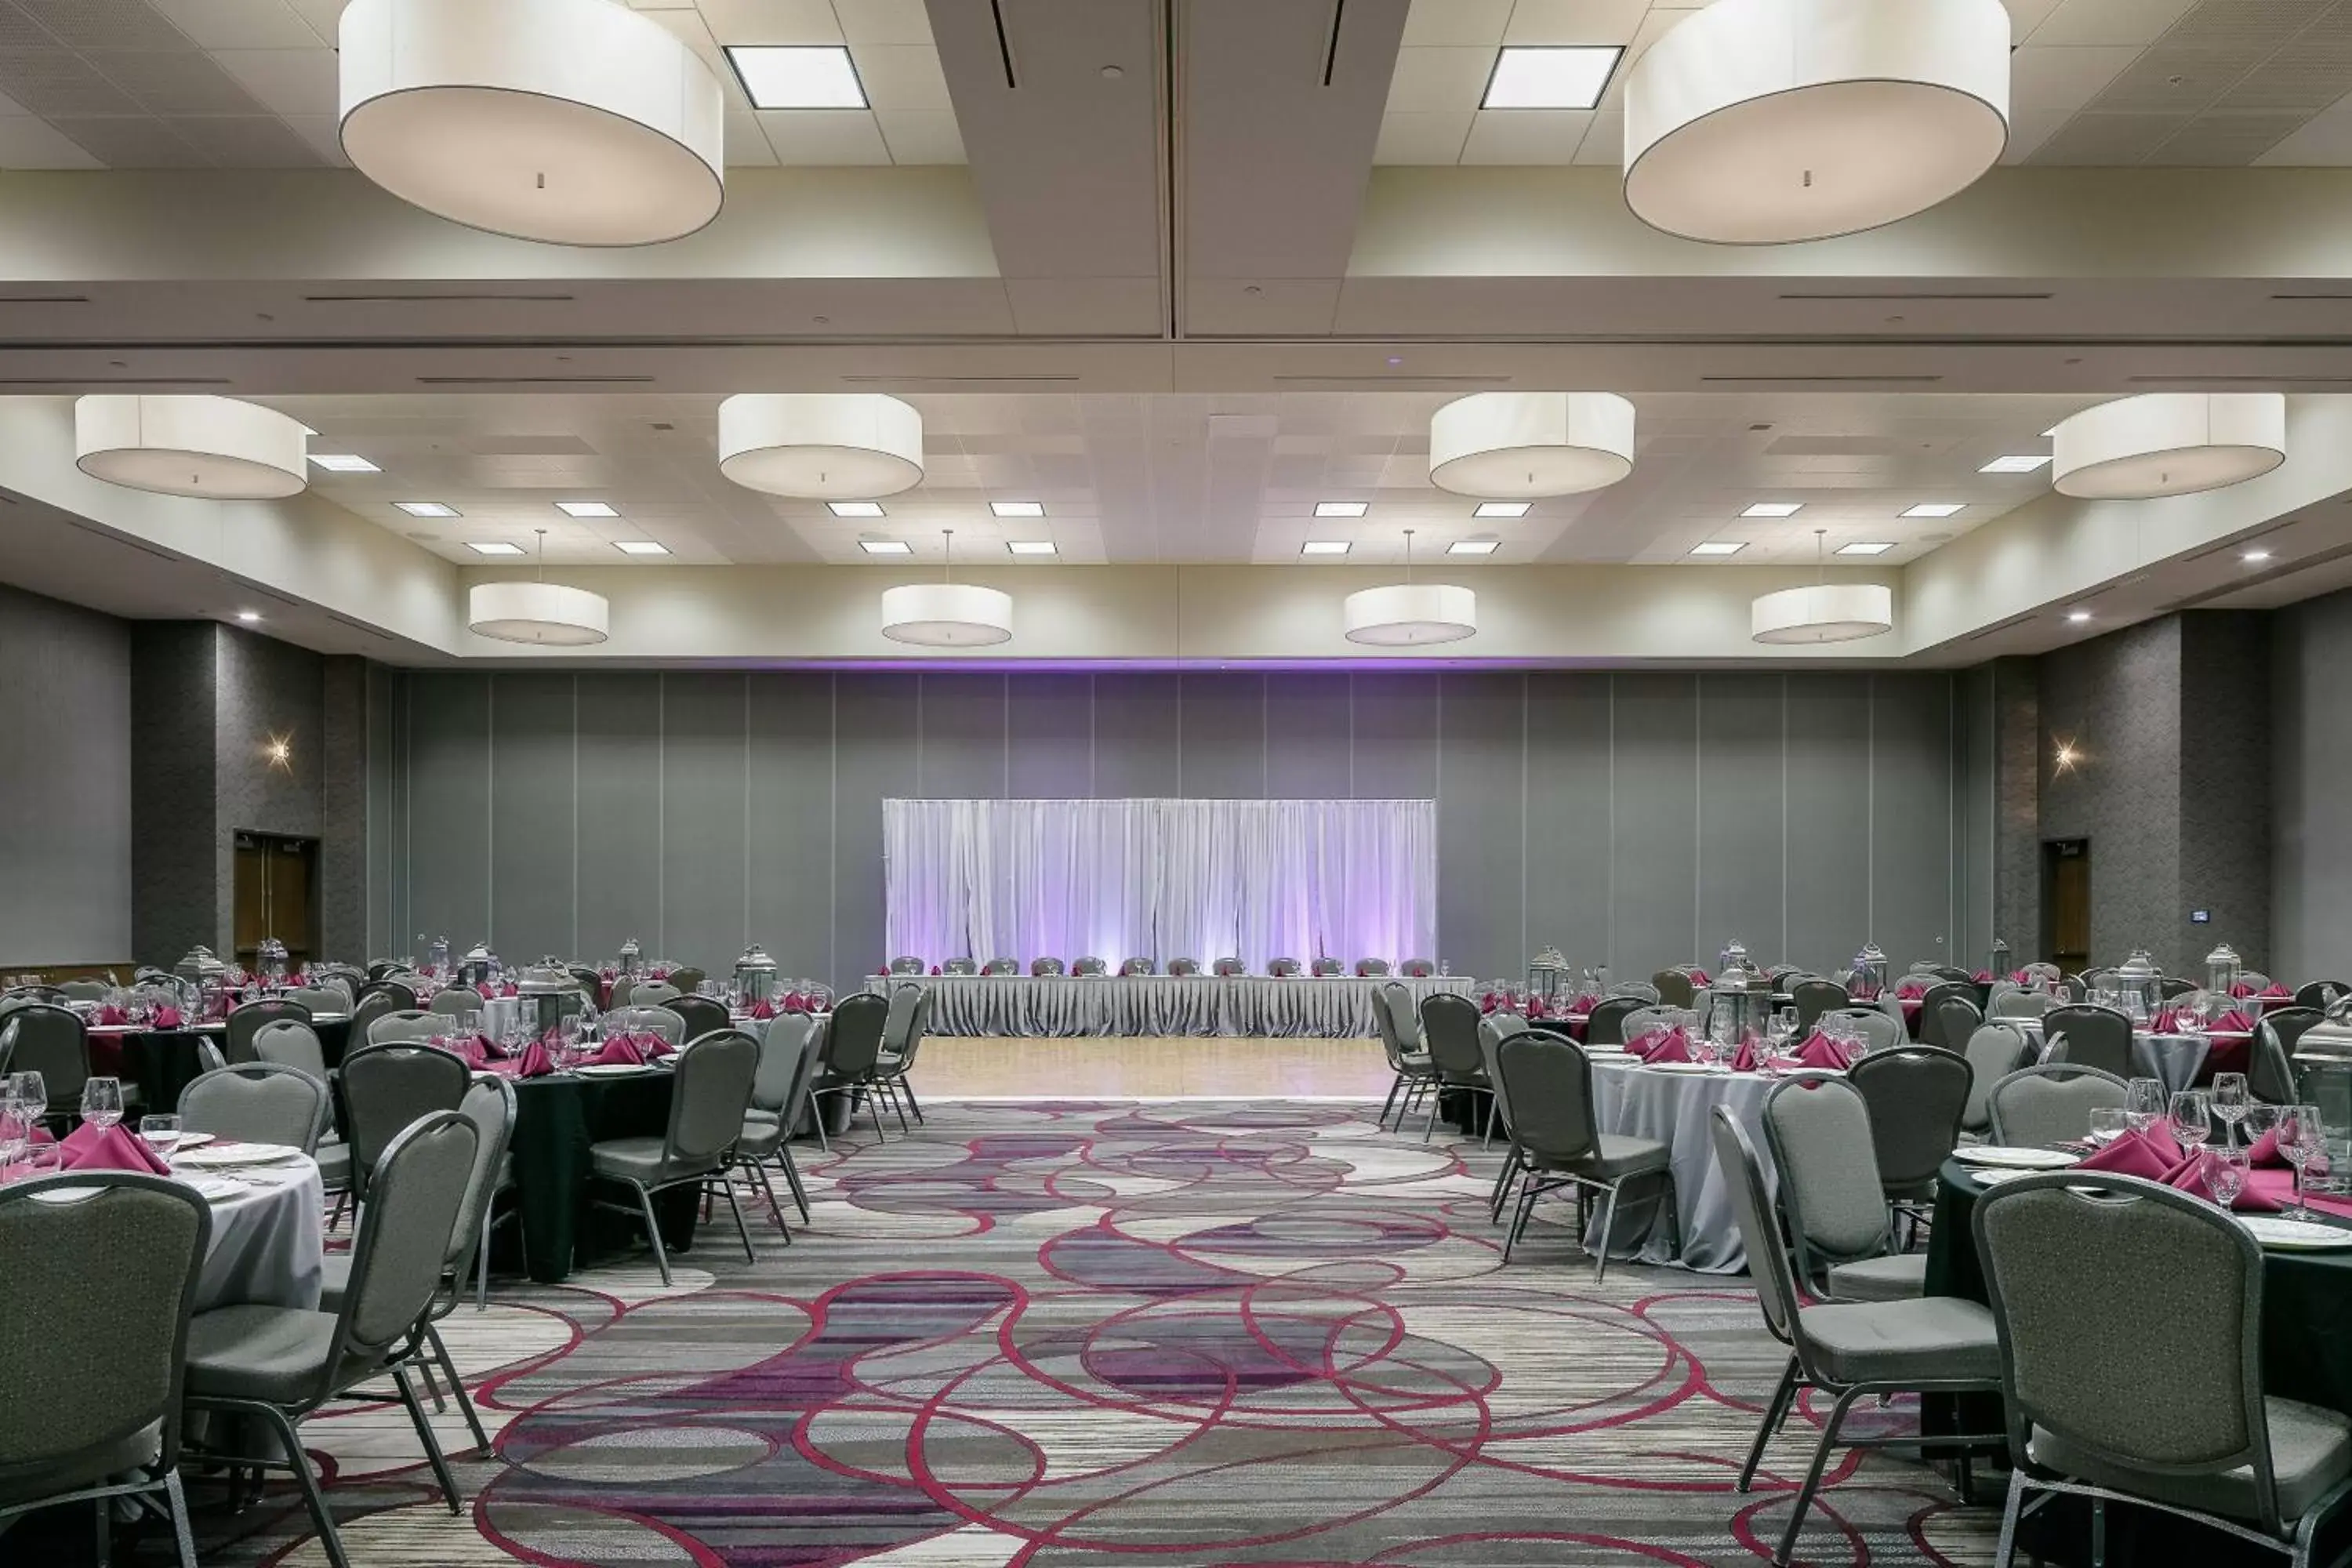 Banquet/Function facilities, Banquet Facilities in Courtyard by Marriott Omaha Bellevue at Beardmore Event Center